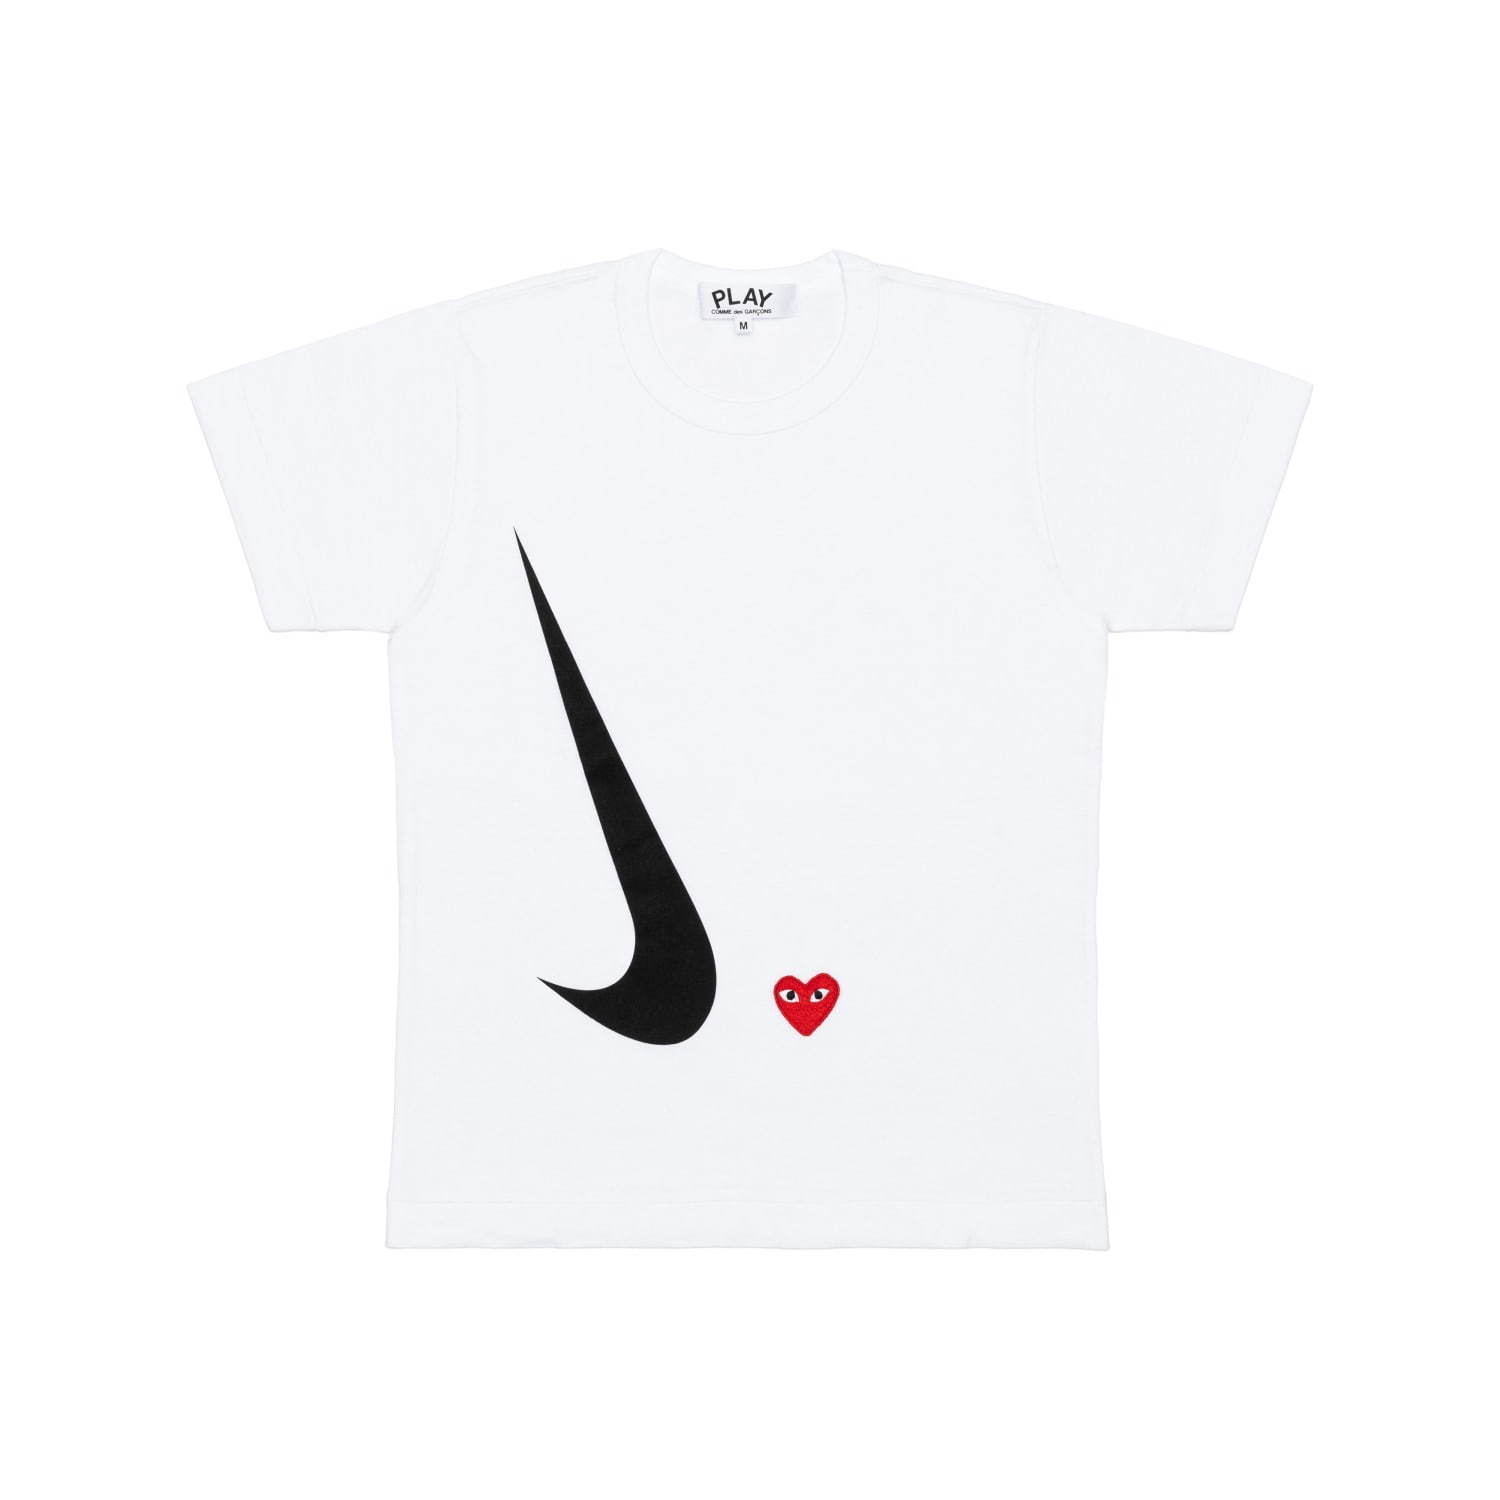 PLAY COMME des GARCONS NIKE コラボパーカーパーカー